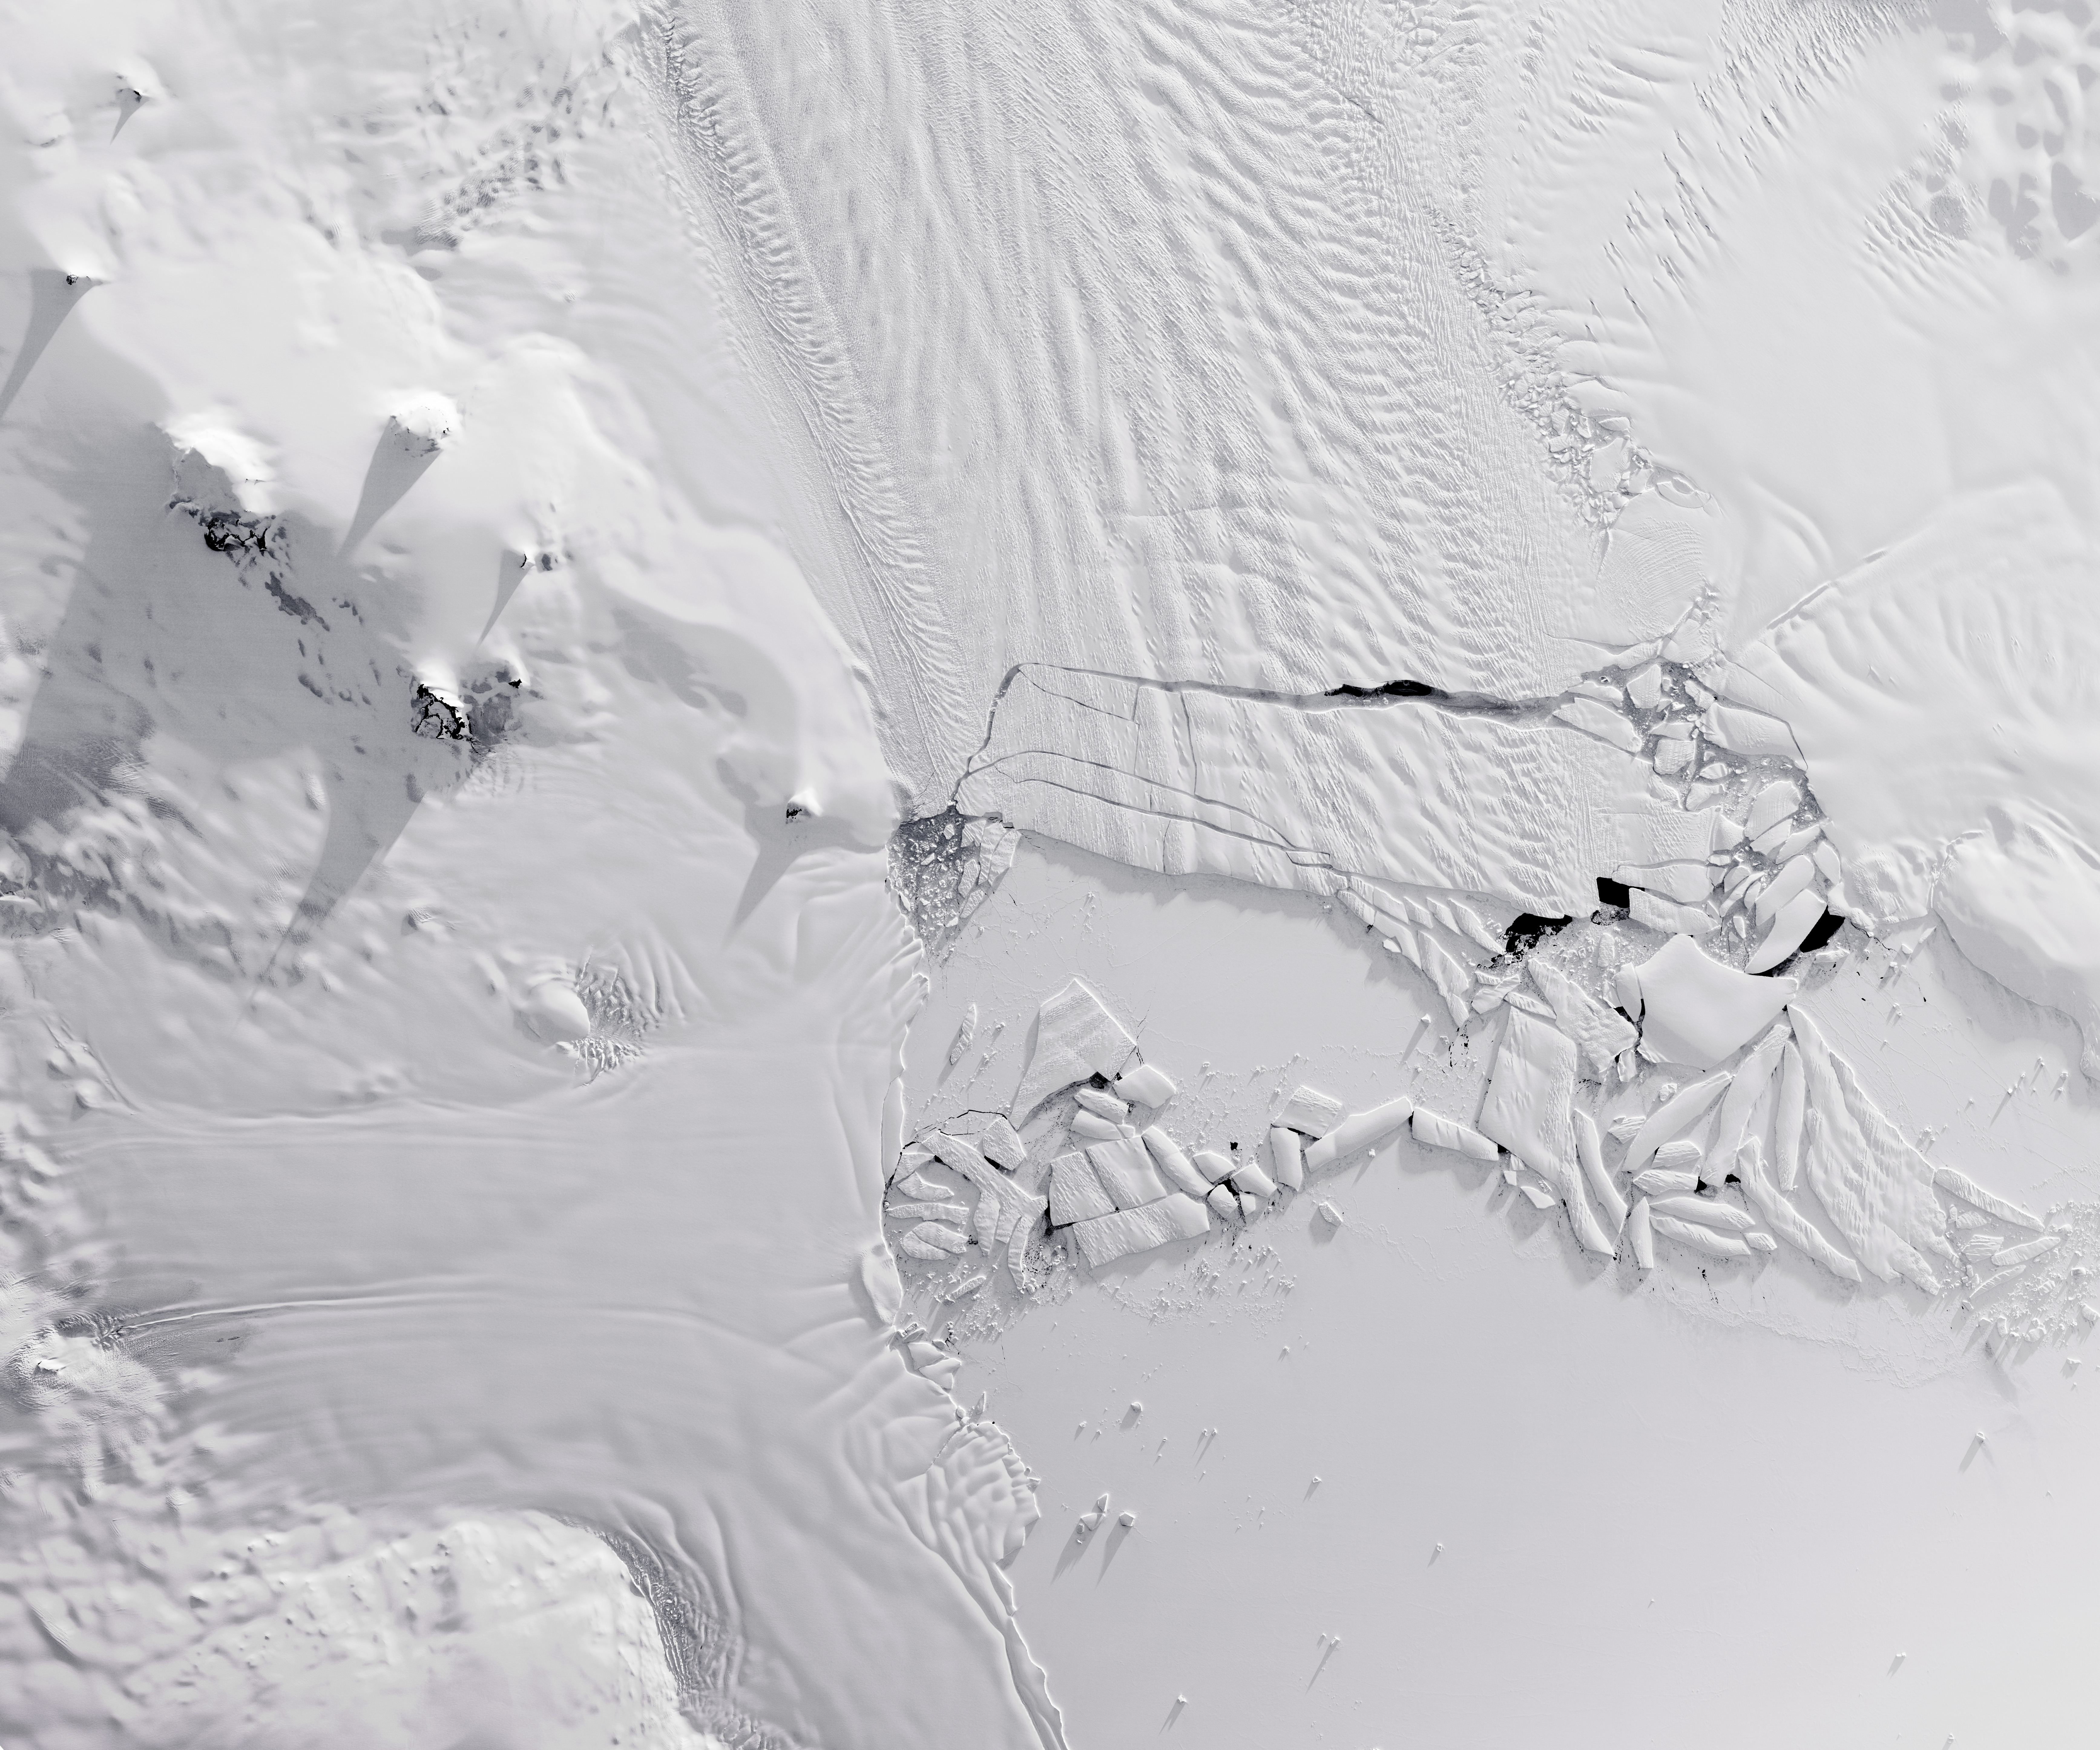 Pine Island Glacier Quickly Drops Another Iceberg - related image preview